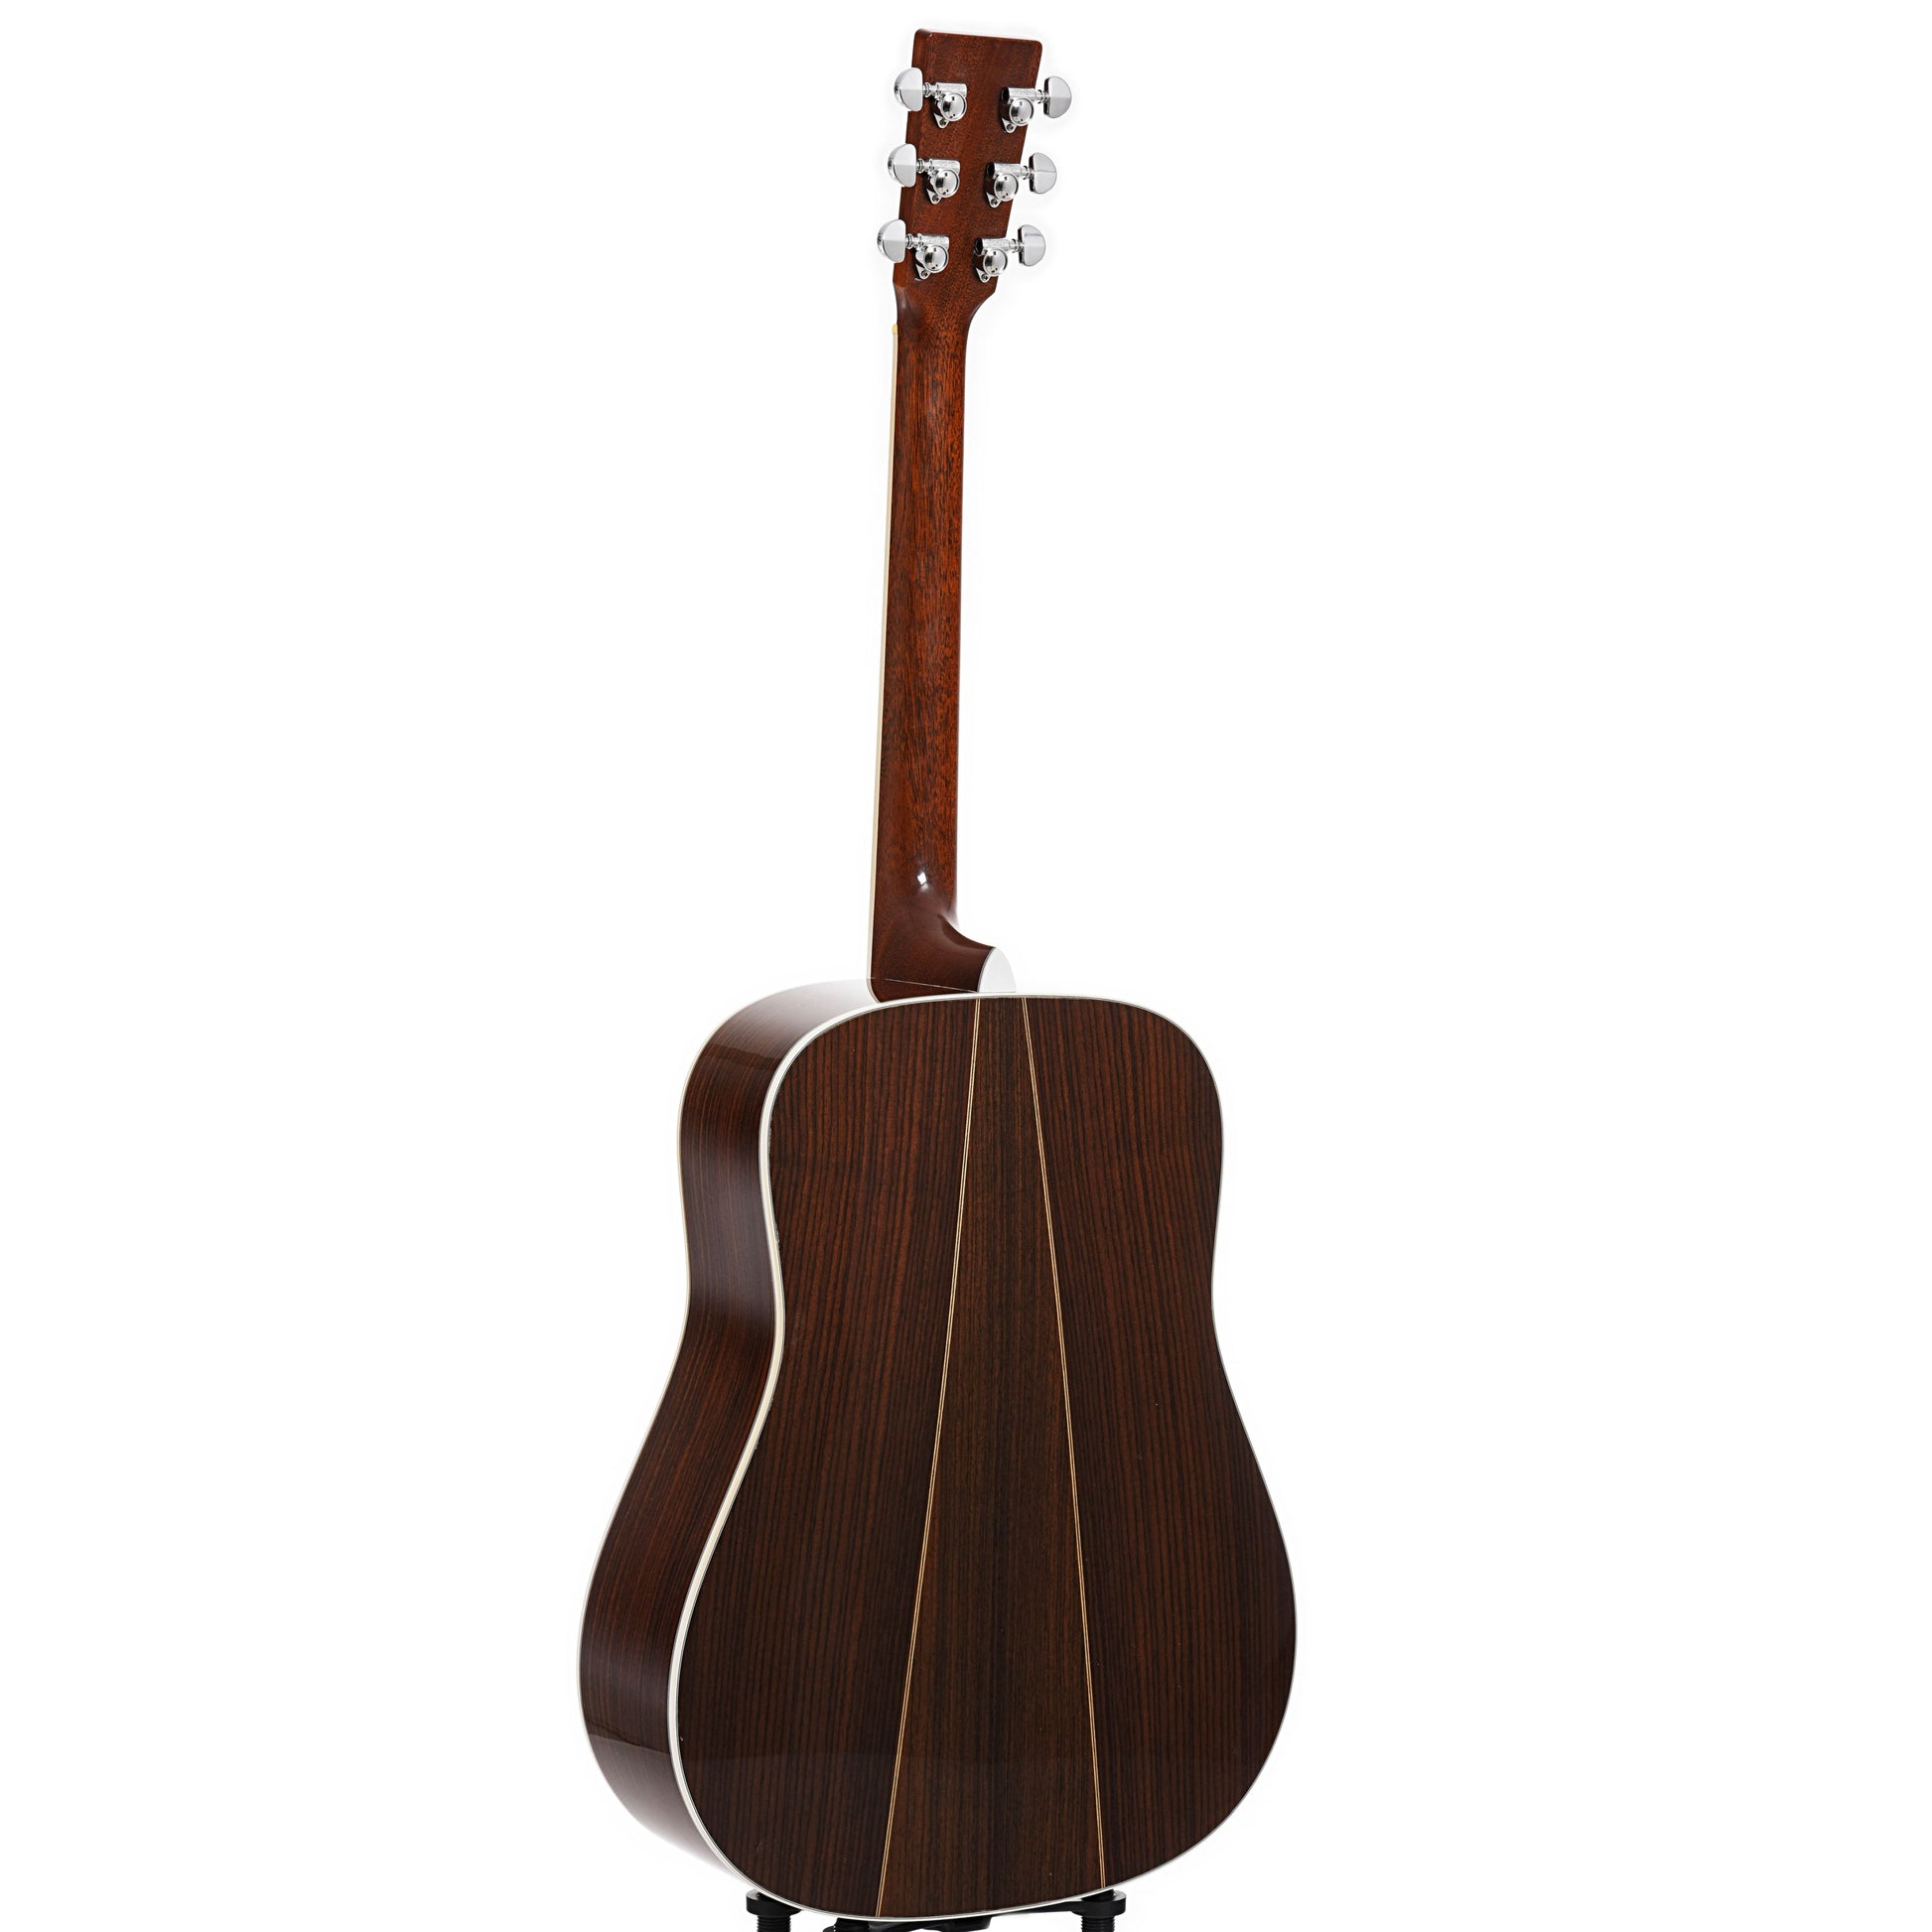 Full back and side of Martin D-35 Centennial Acoustic